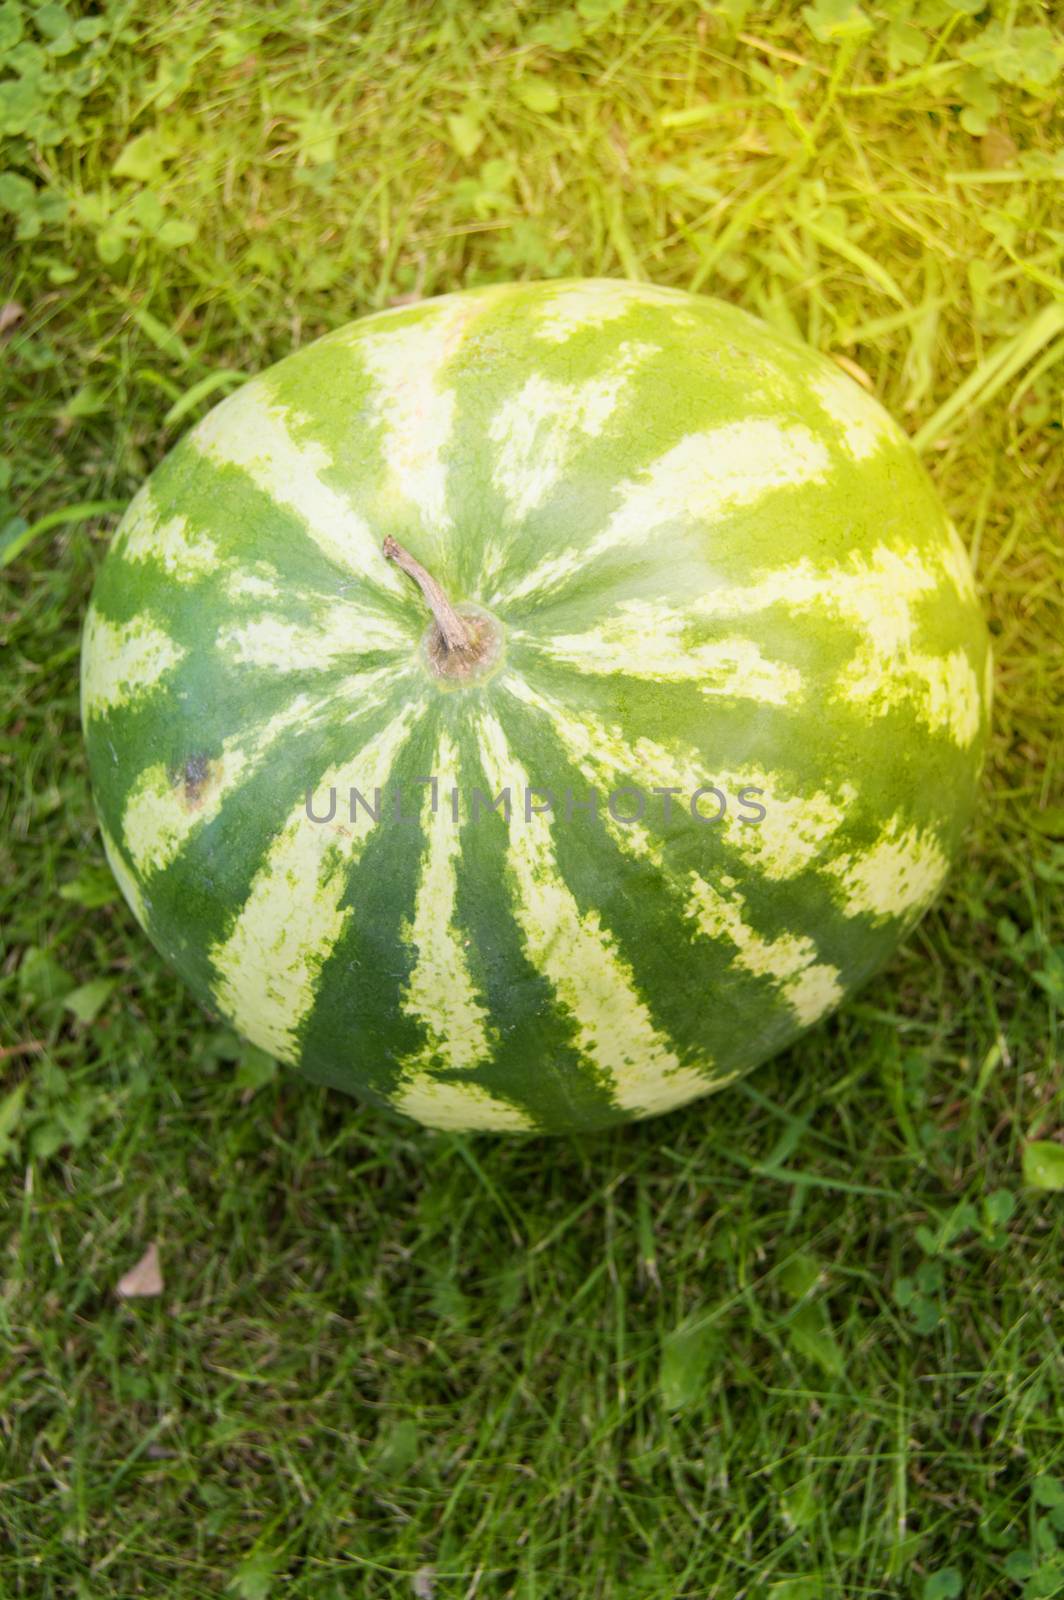 Summer, party, striped watermelon lying on the grass prepared for a summer party with friends, close-up.